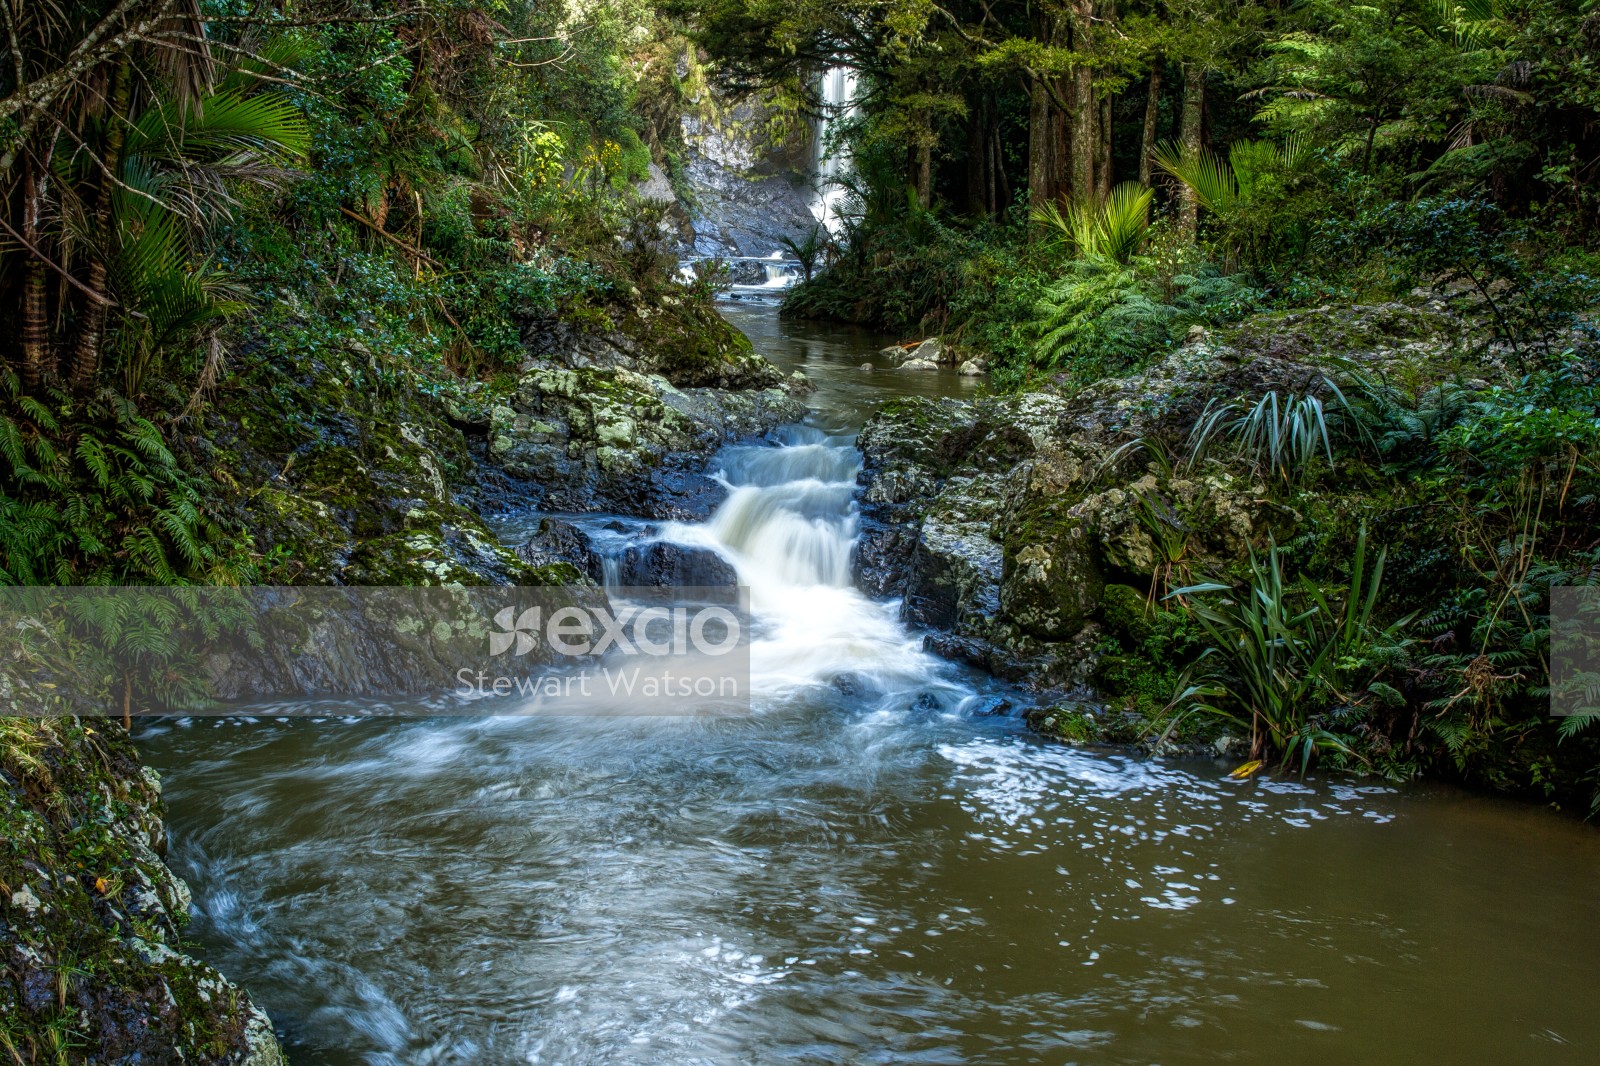 Down stream from the Piroa falls